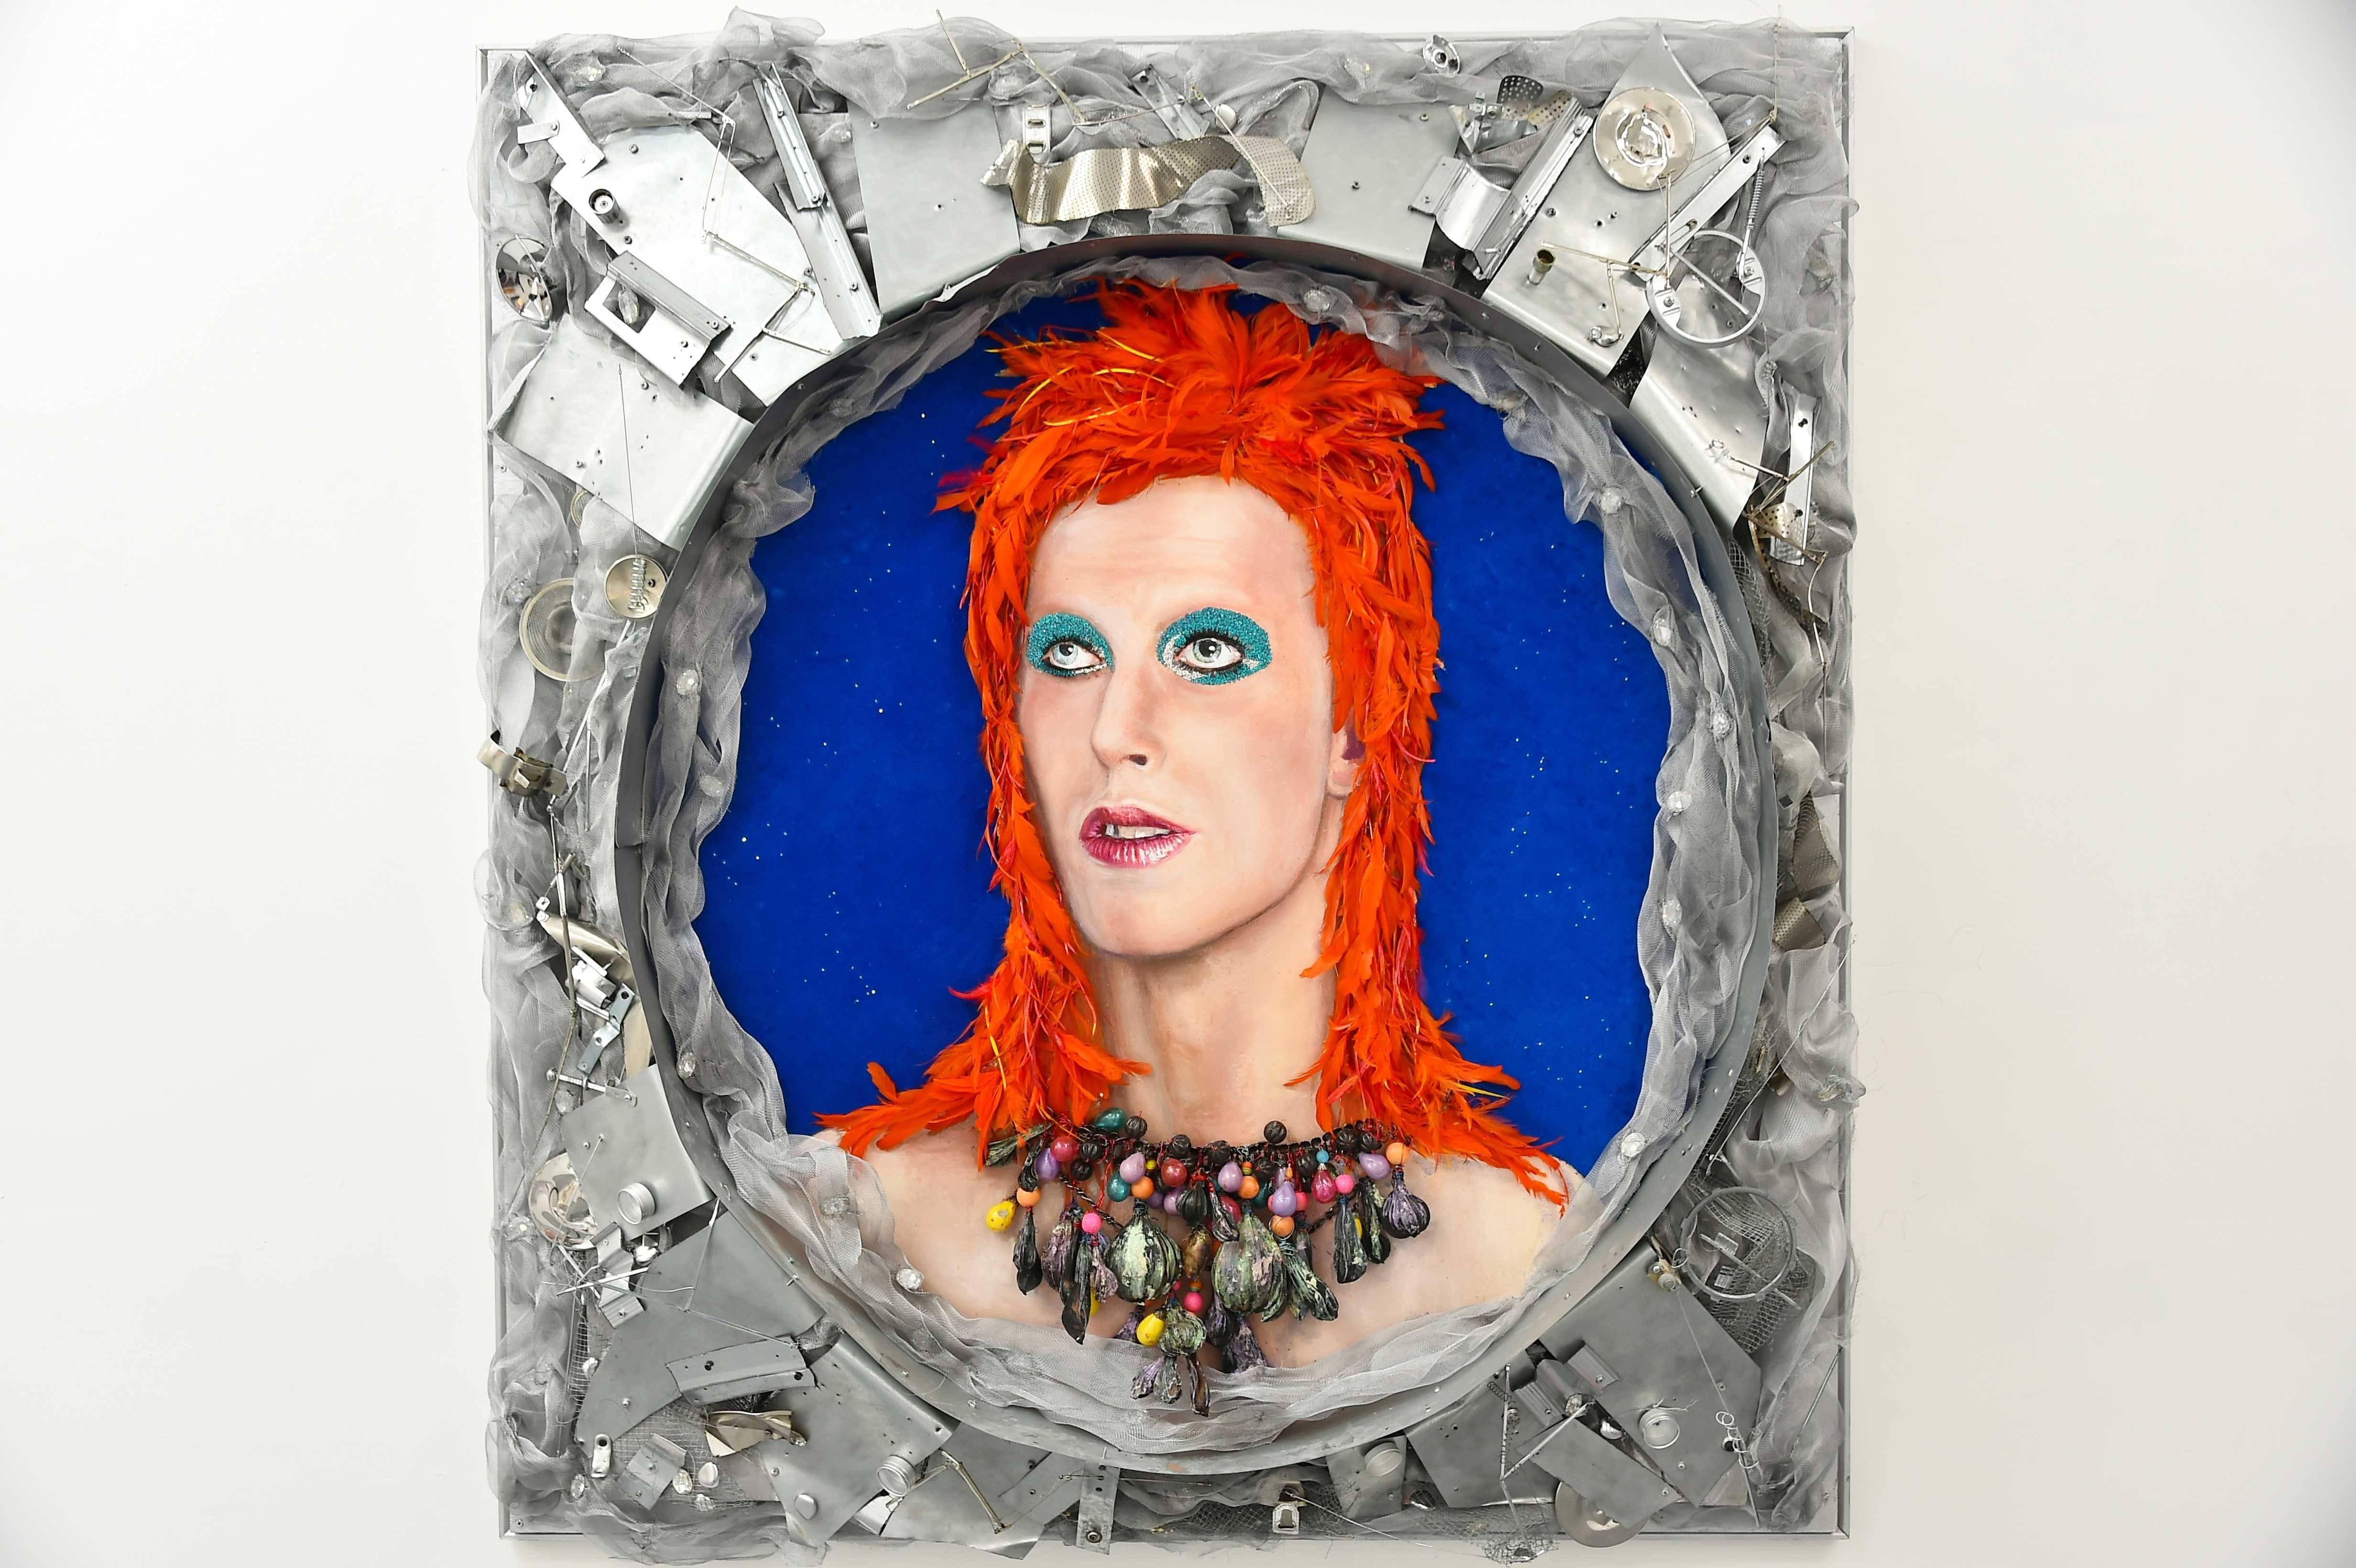 Bowie in Space - Mixed Media - 3d Portrait - one of a kind piece -  - Mixed Media Art by StrosbergMandel